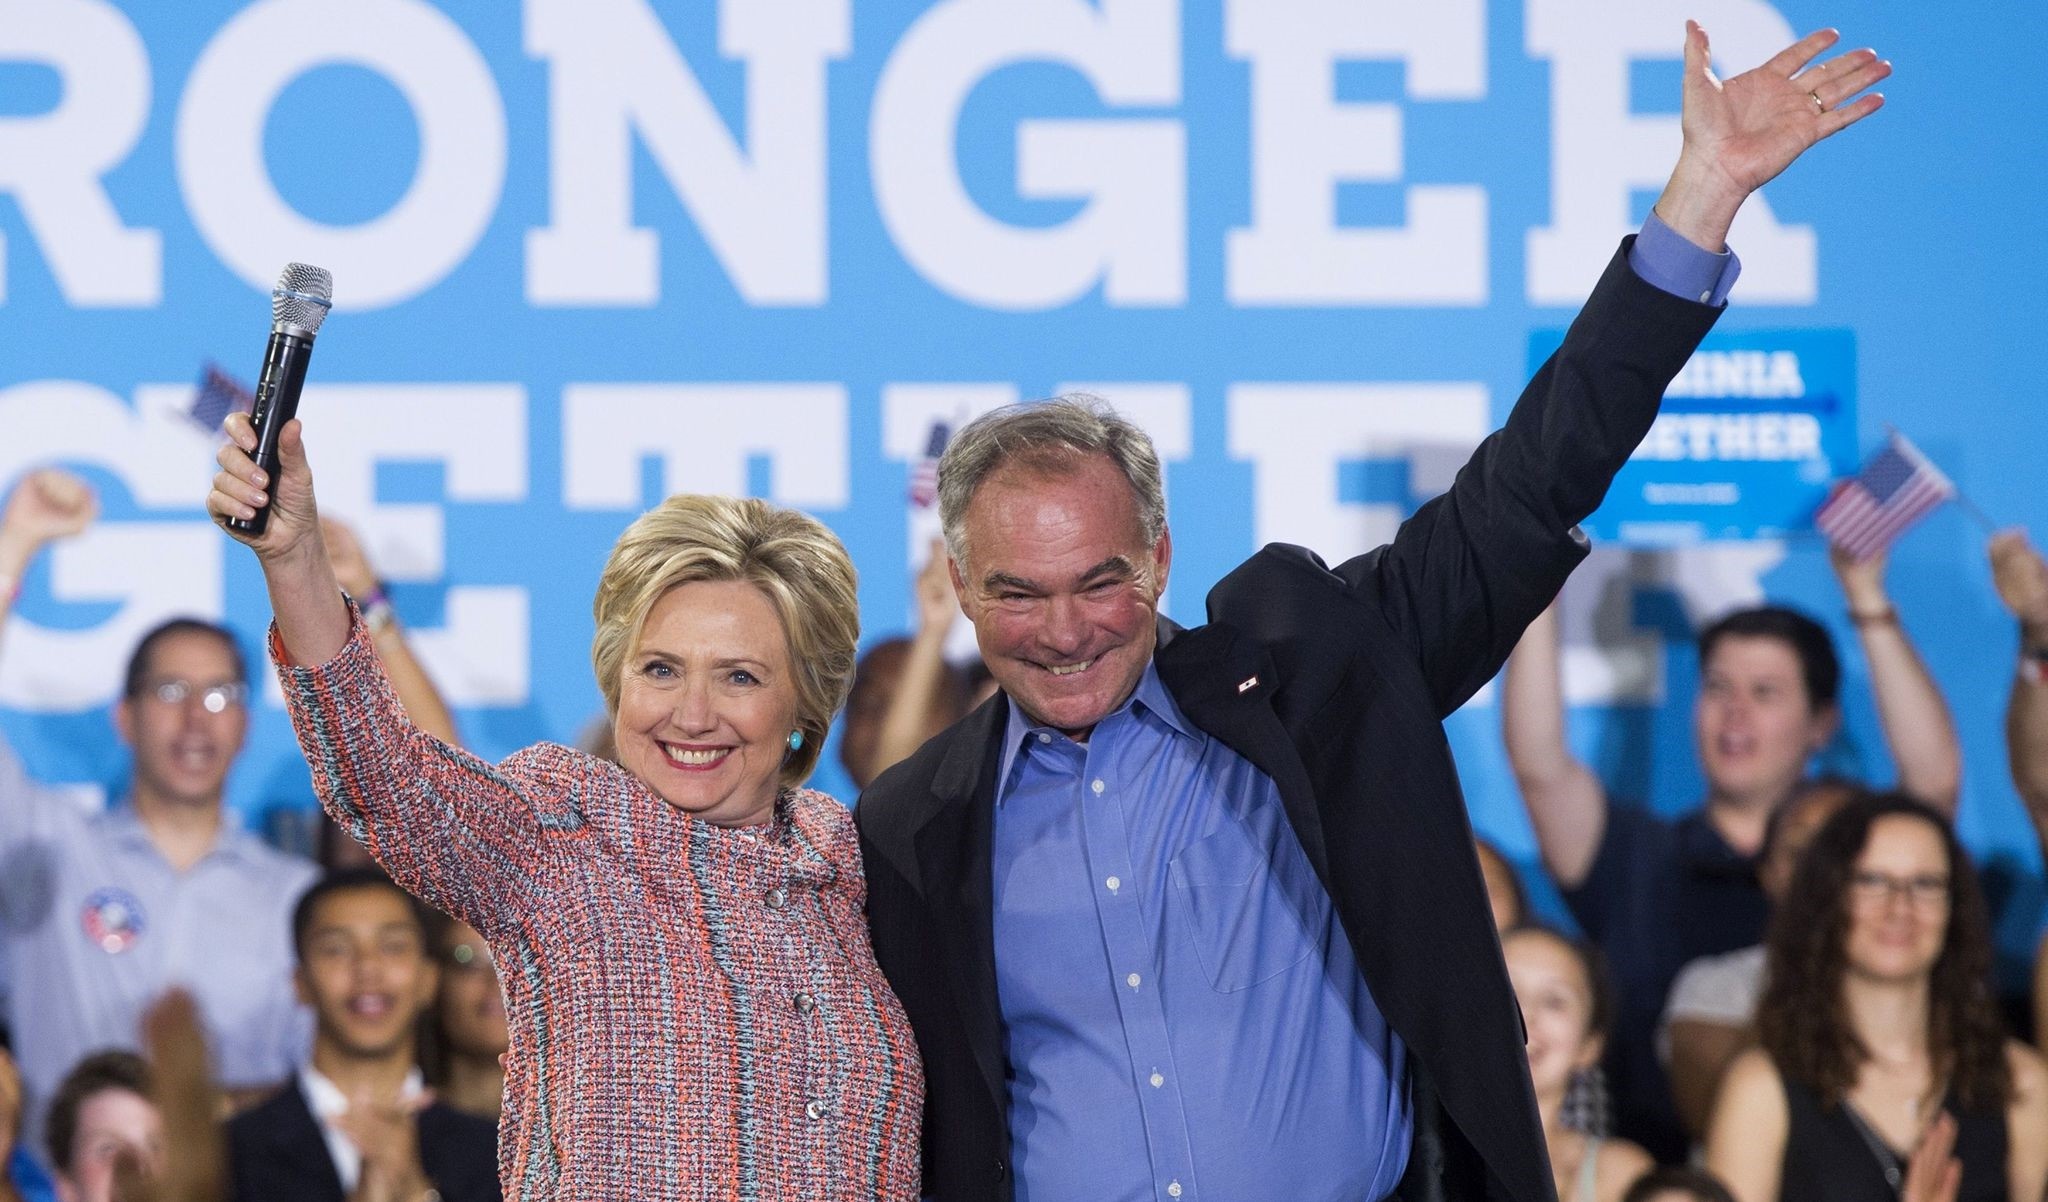 Hillary Clinton and US Senator Tim Kaine waving during a campaign rally in Annandale, Virginia. (AFP Photo)